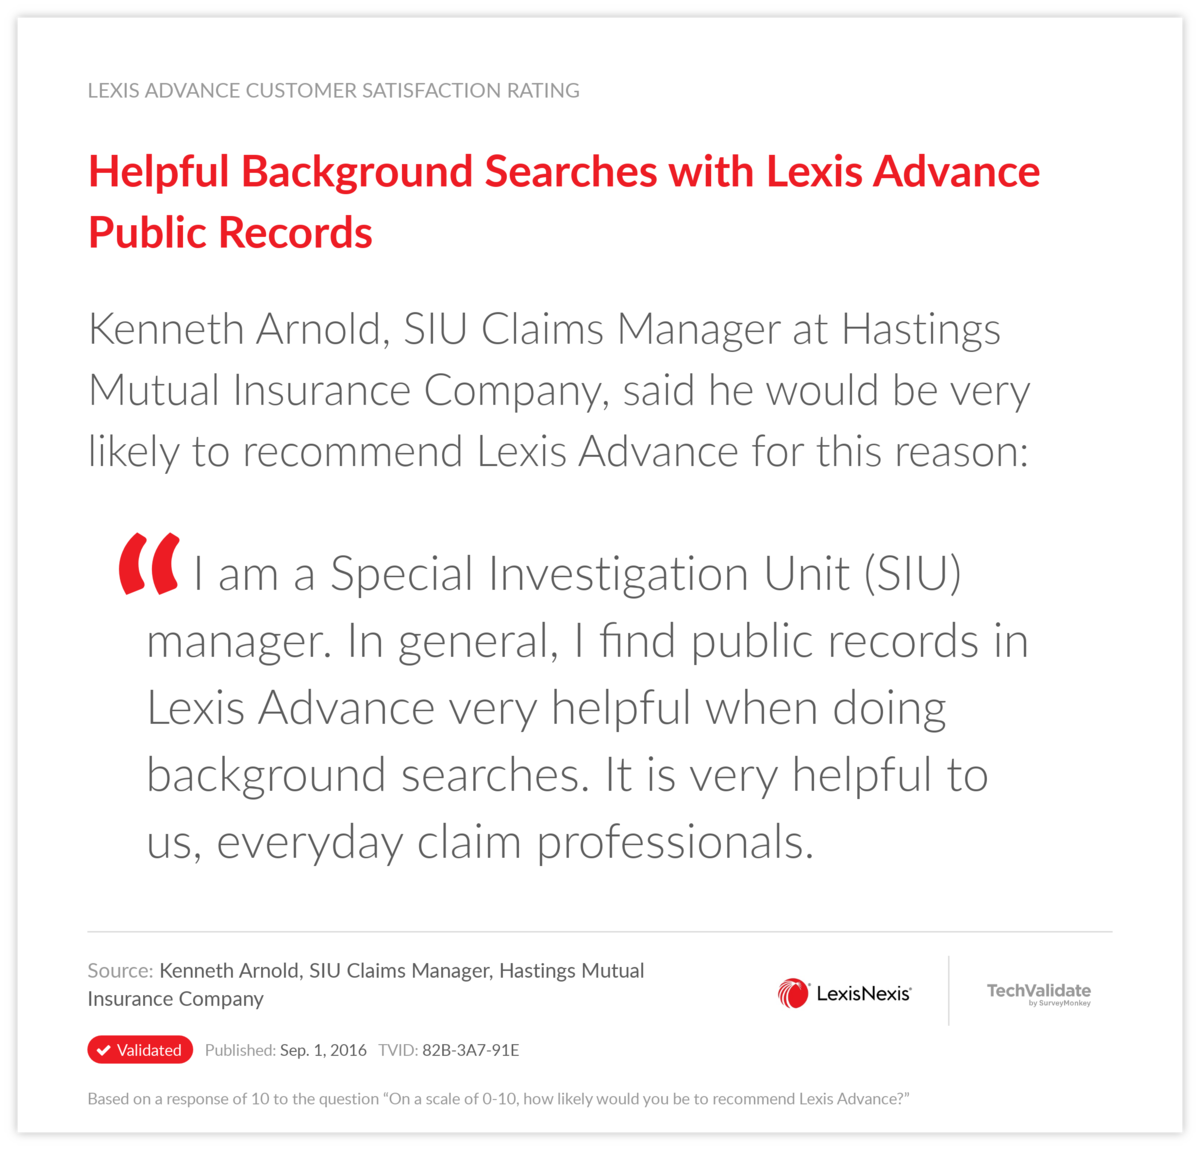 Helpful Background Searches with Lexis Advance Public Records